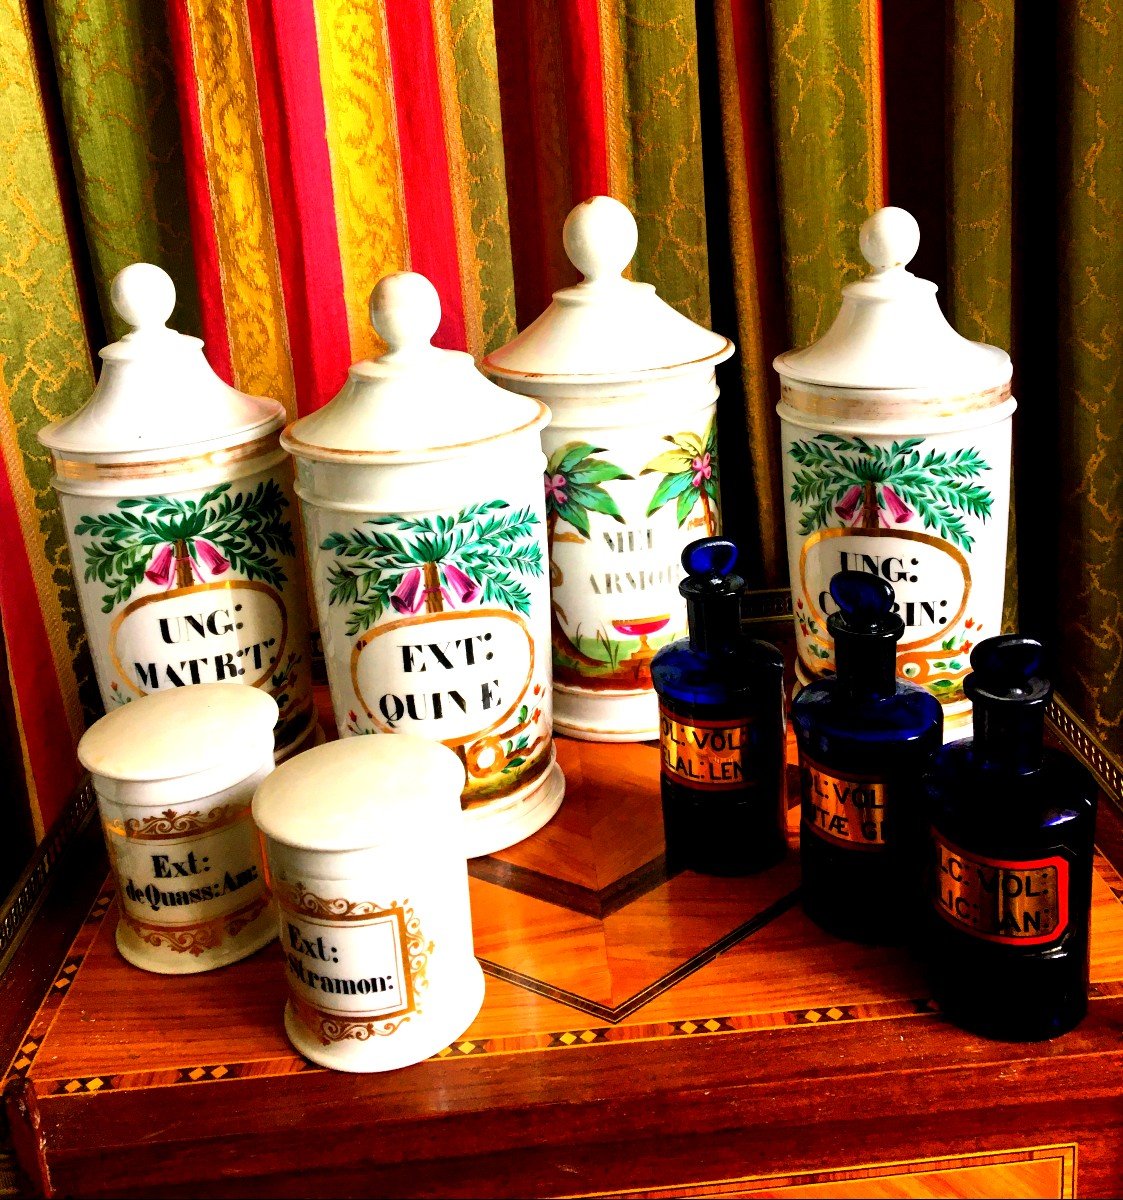 Beautiful Set Of Porcelain Pharmacy Pots Old Man In Paris, Two Ointment And 3 Bottles